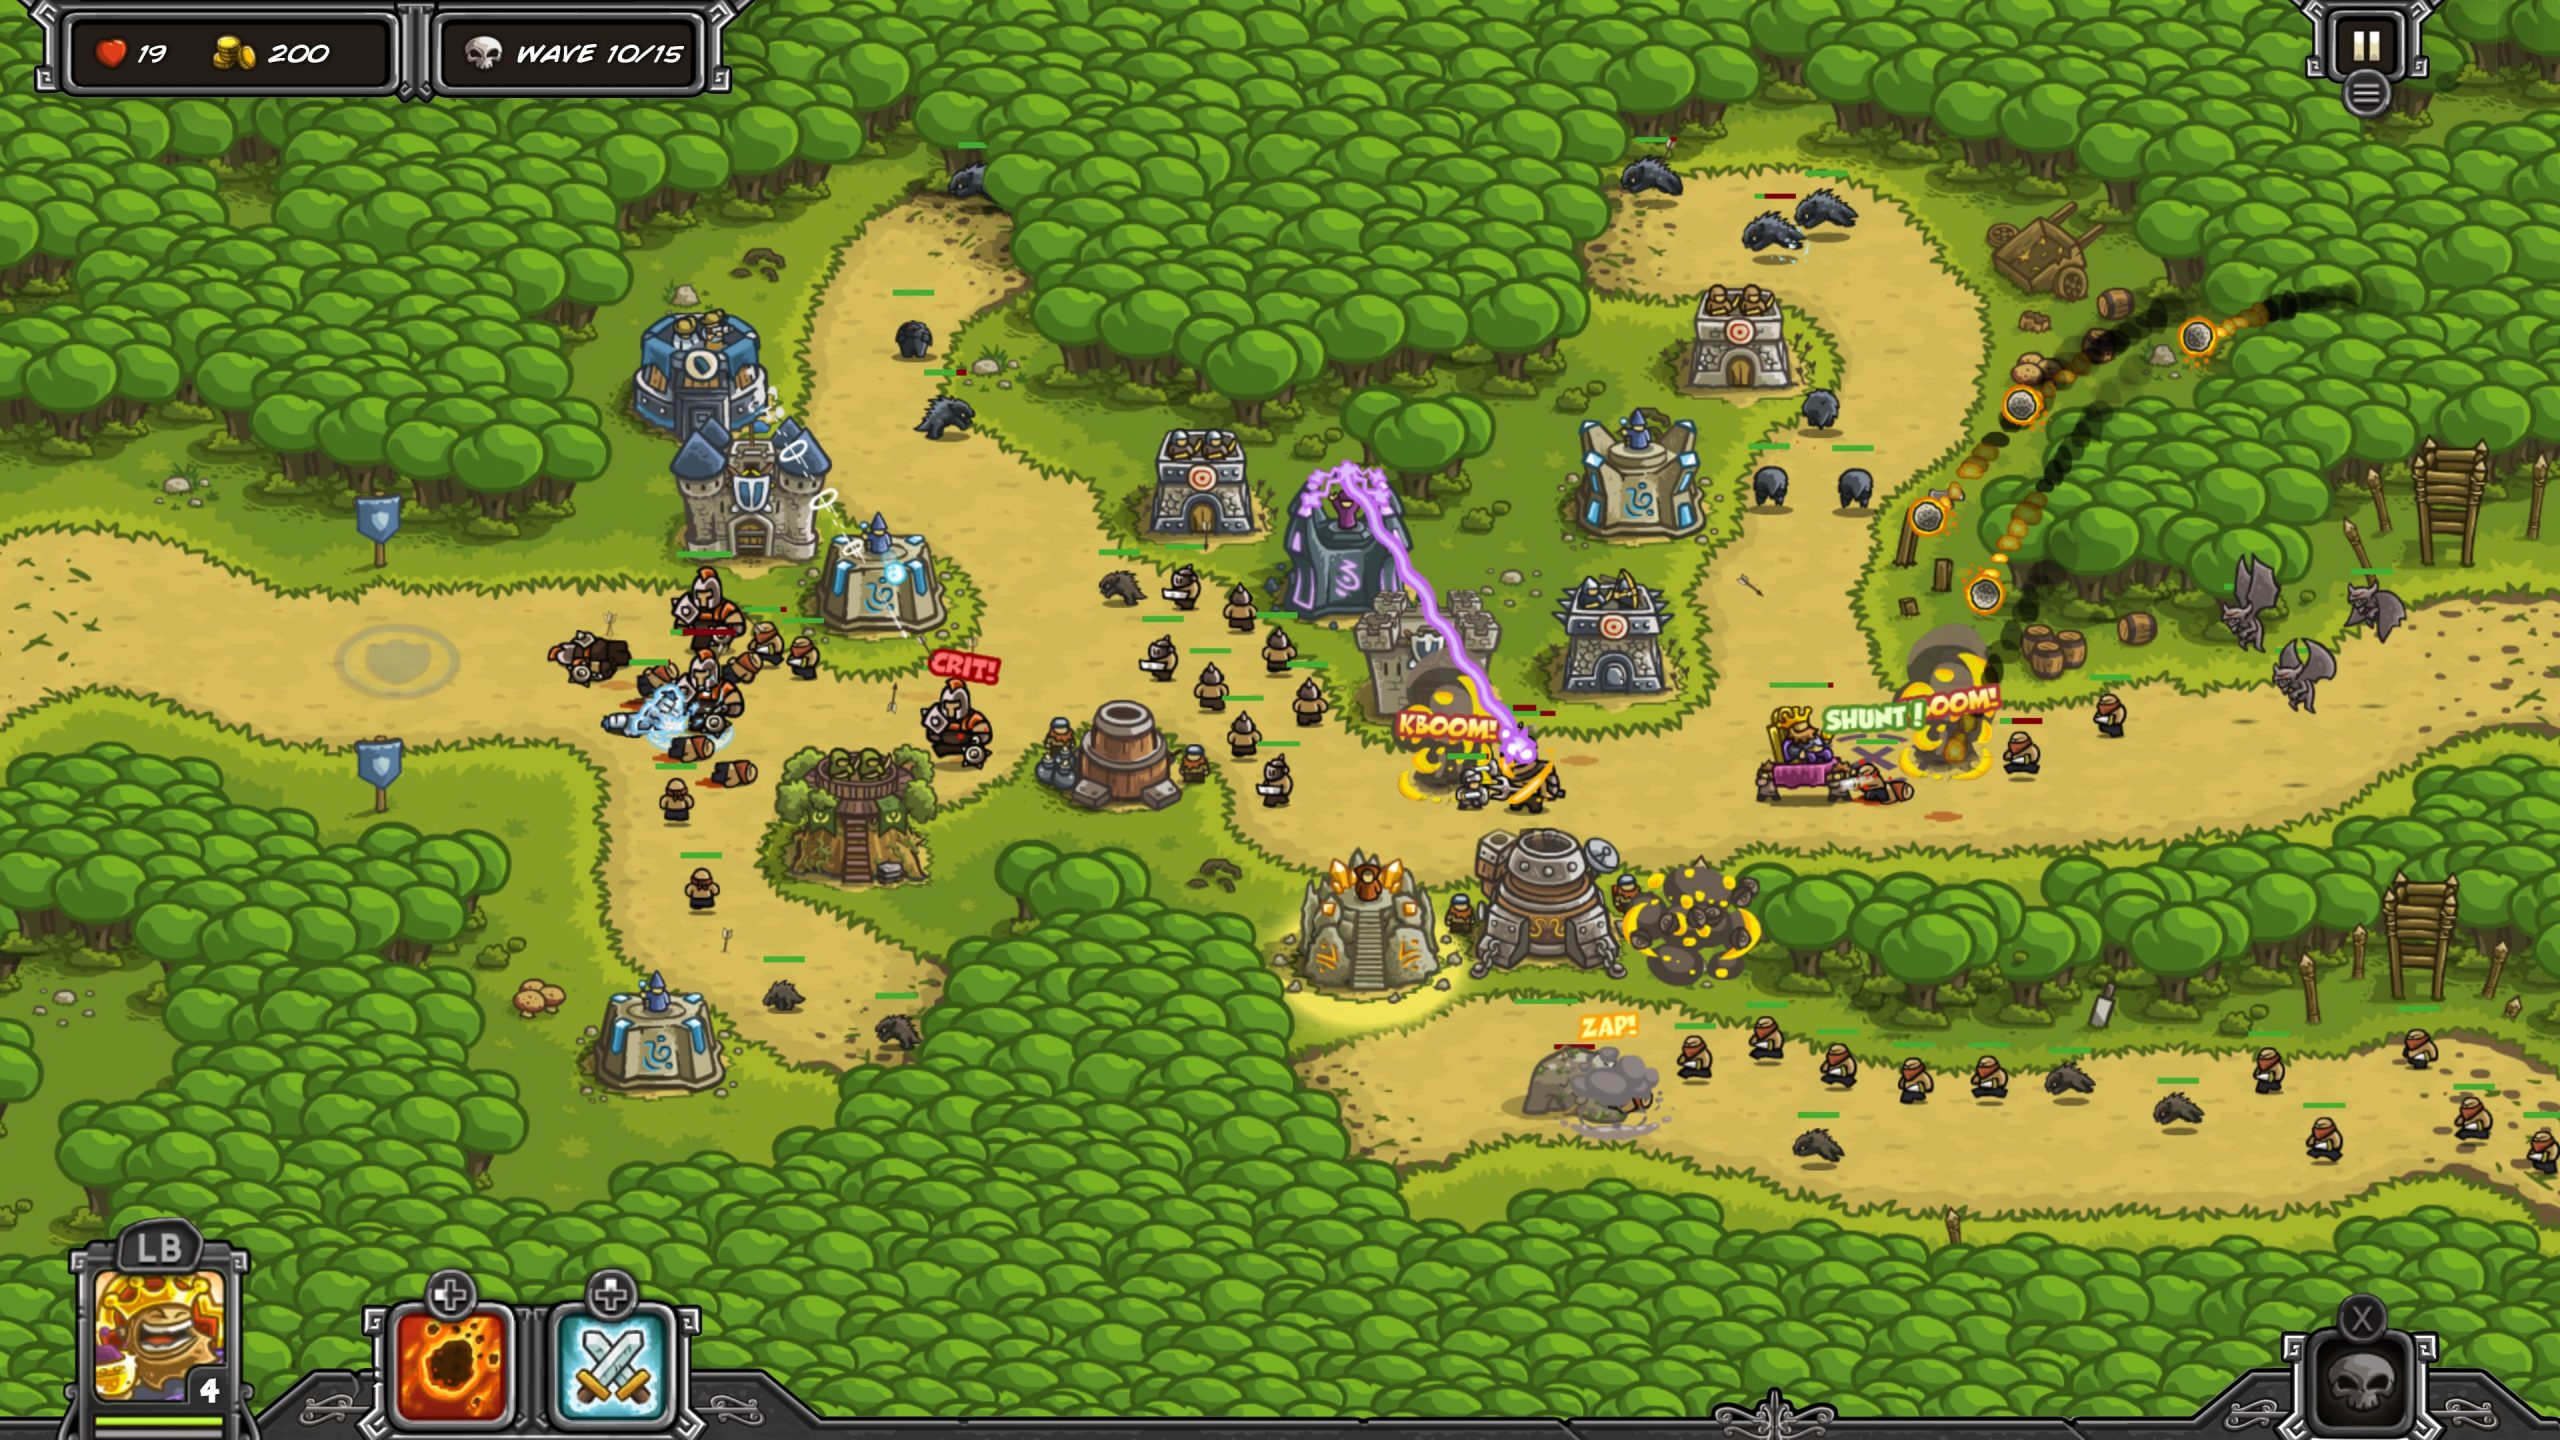 Tower Defense X RELEASED..